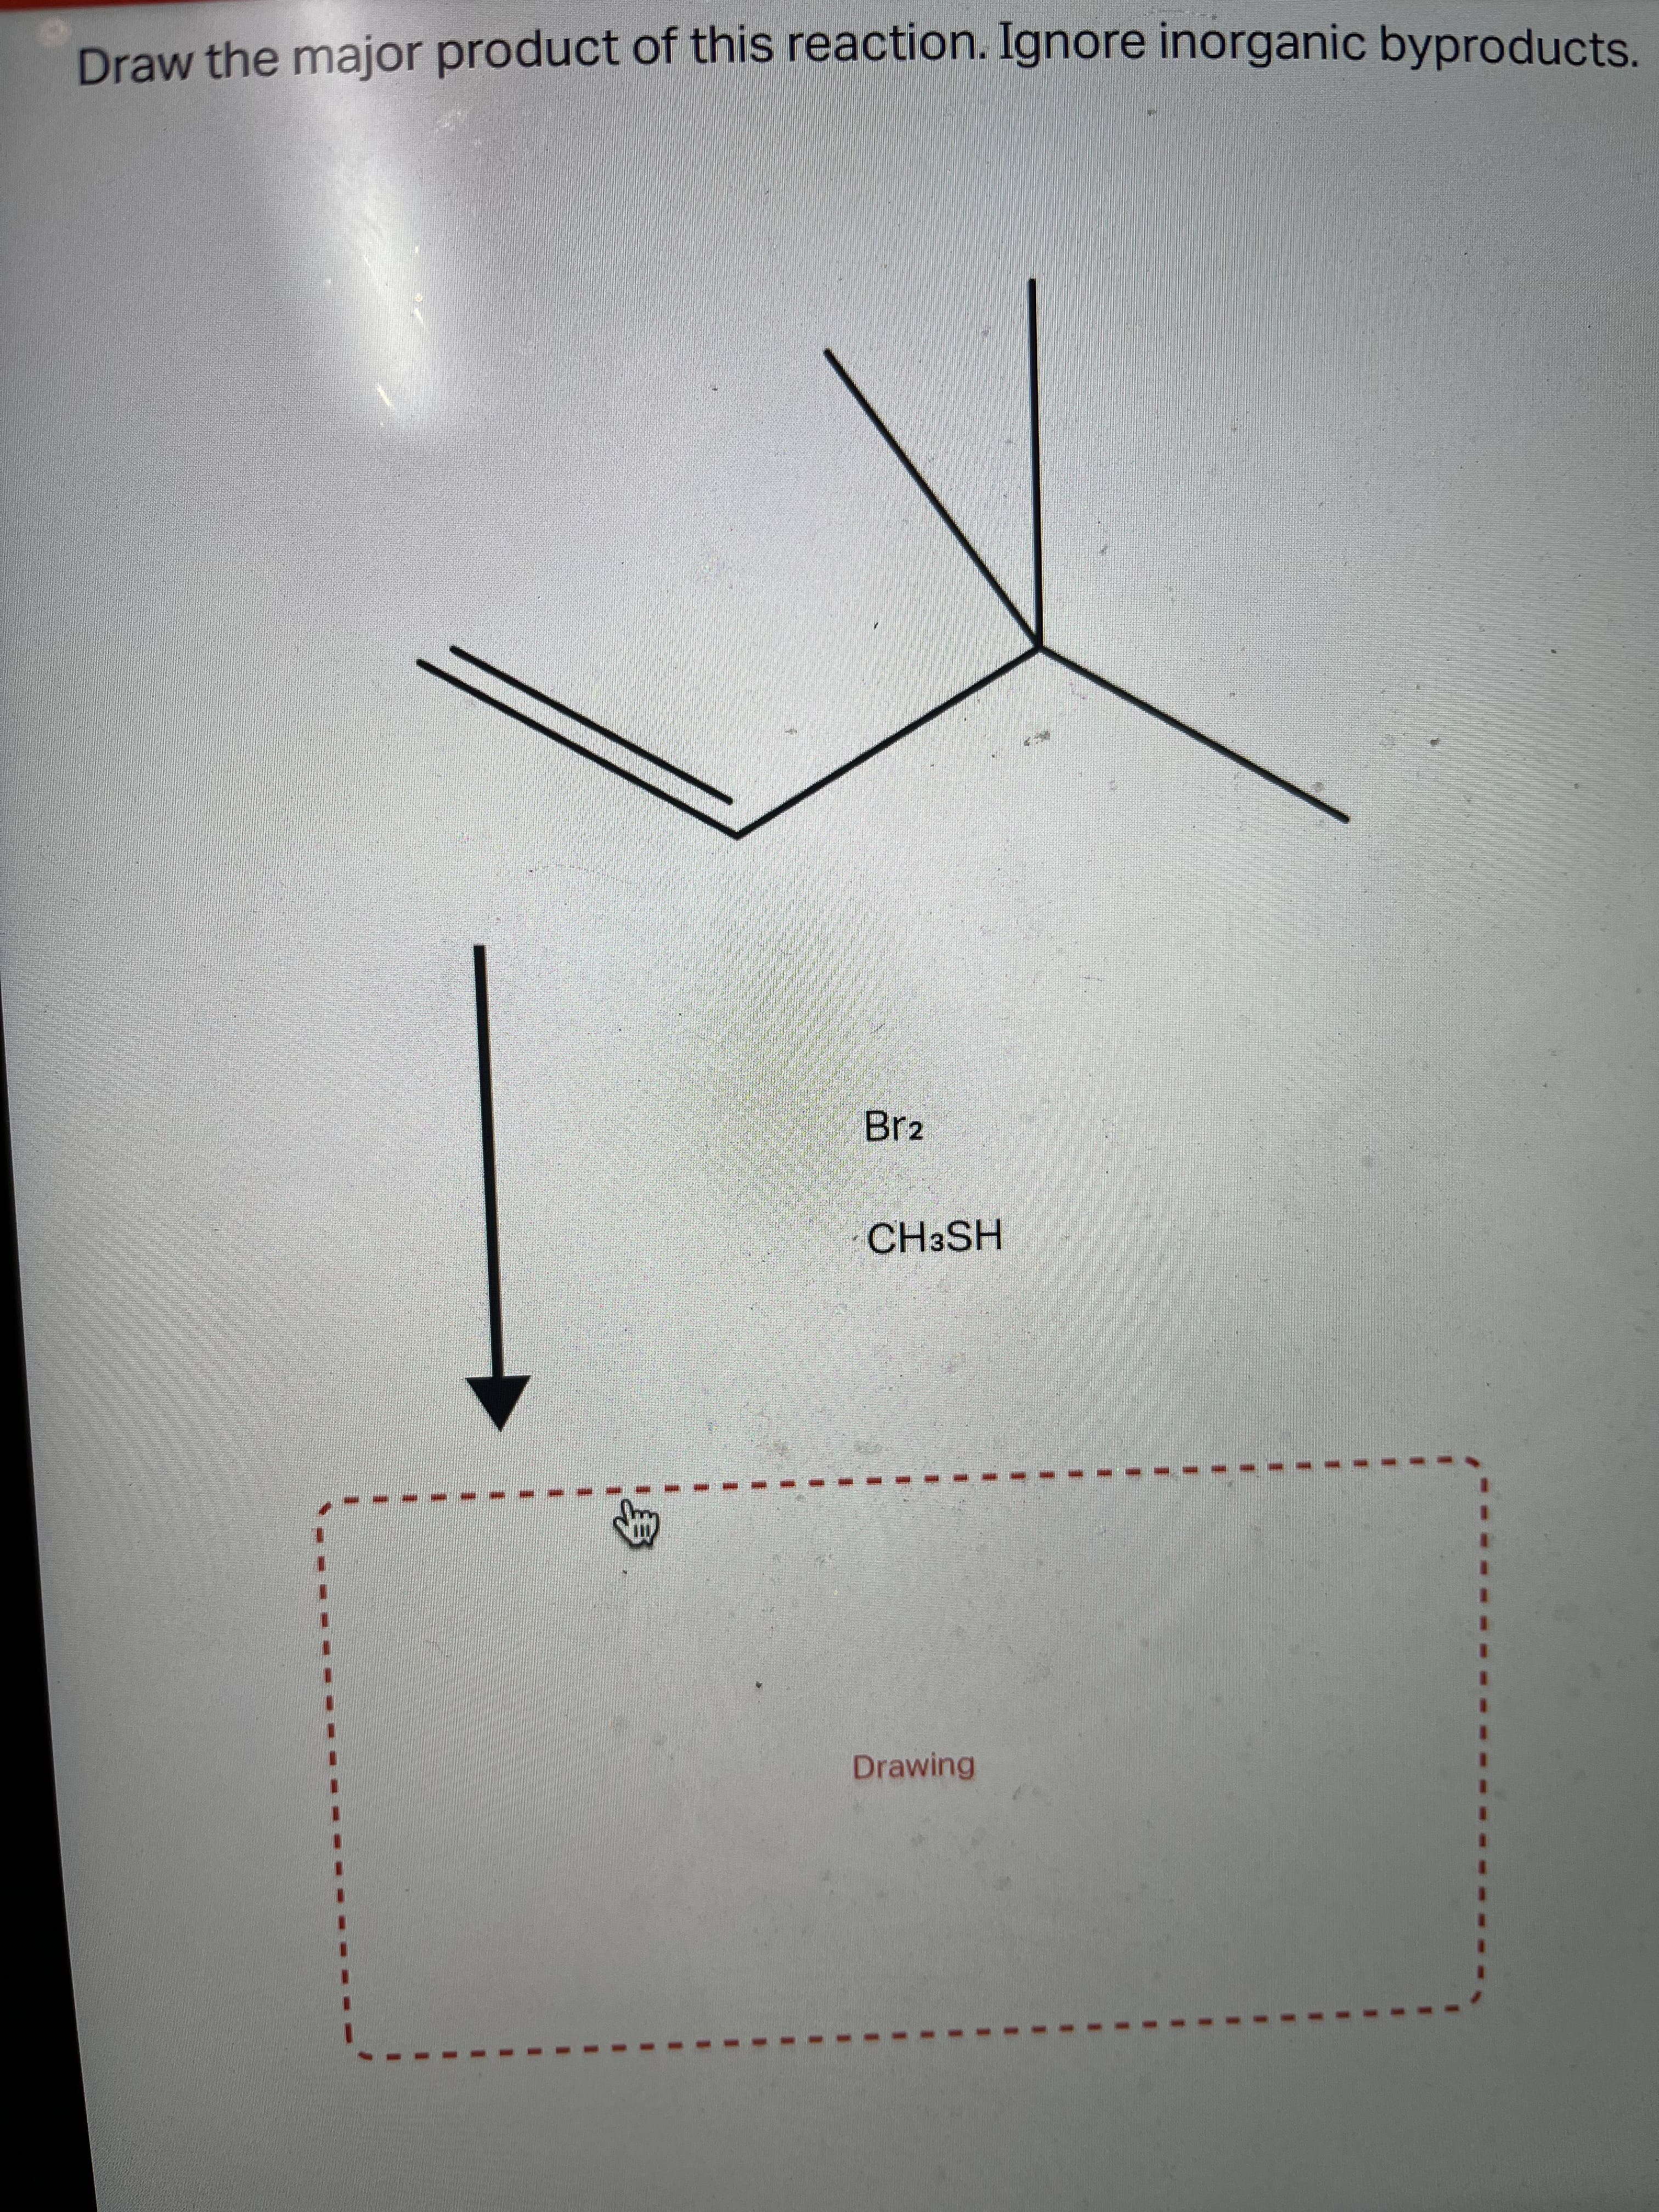 Draw the major product of this reaction. Ignore inorganic byproducts.
Br2
CH3SH
Drawing
